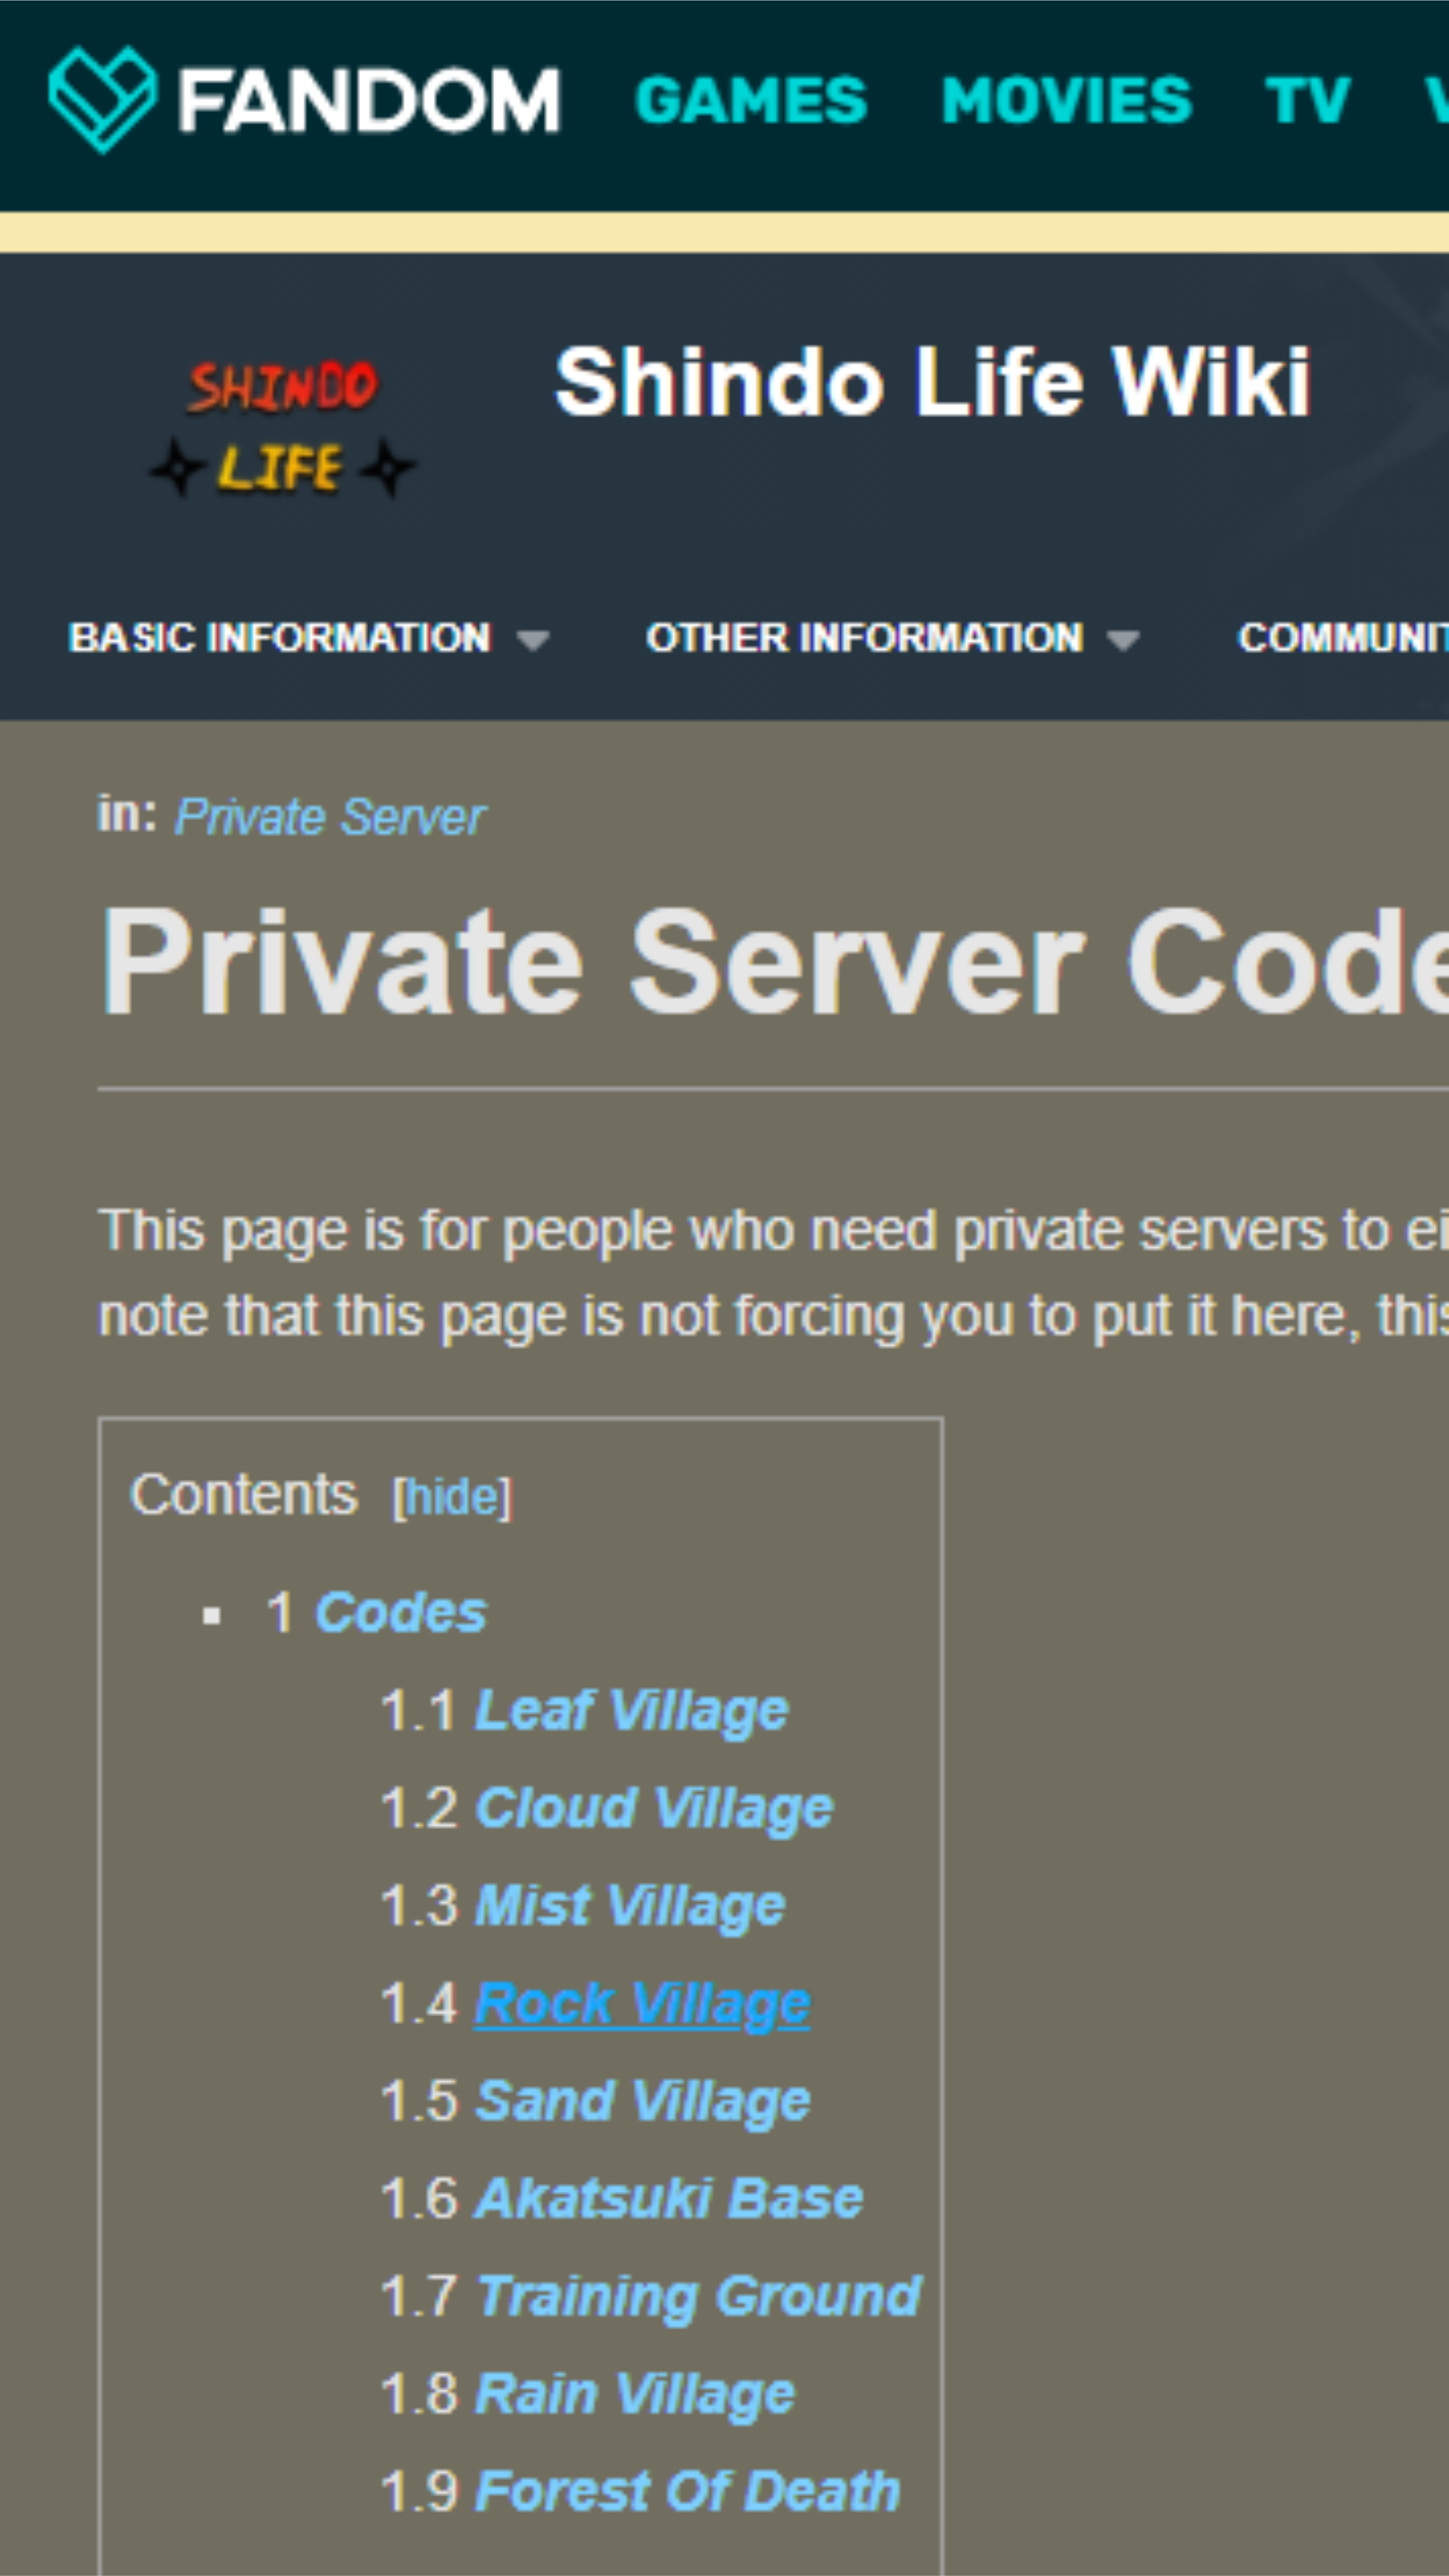 How To Join A Private Server In Shinobi Life 2